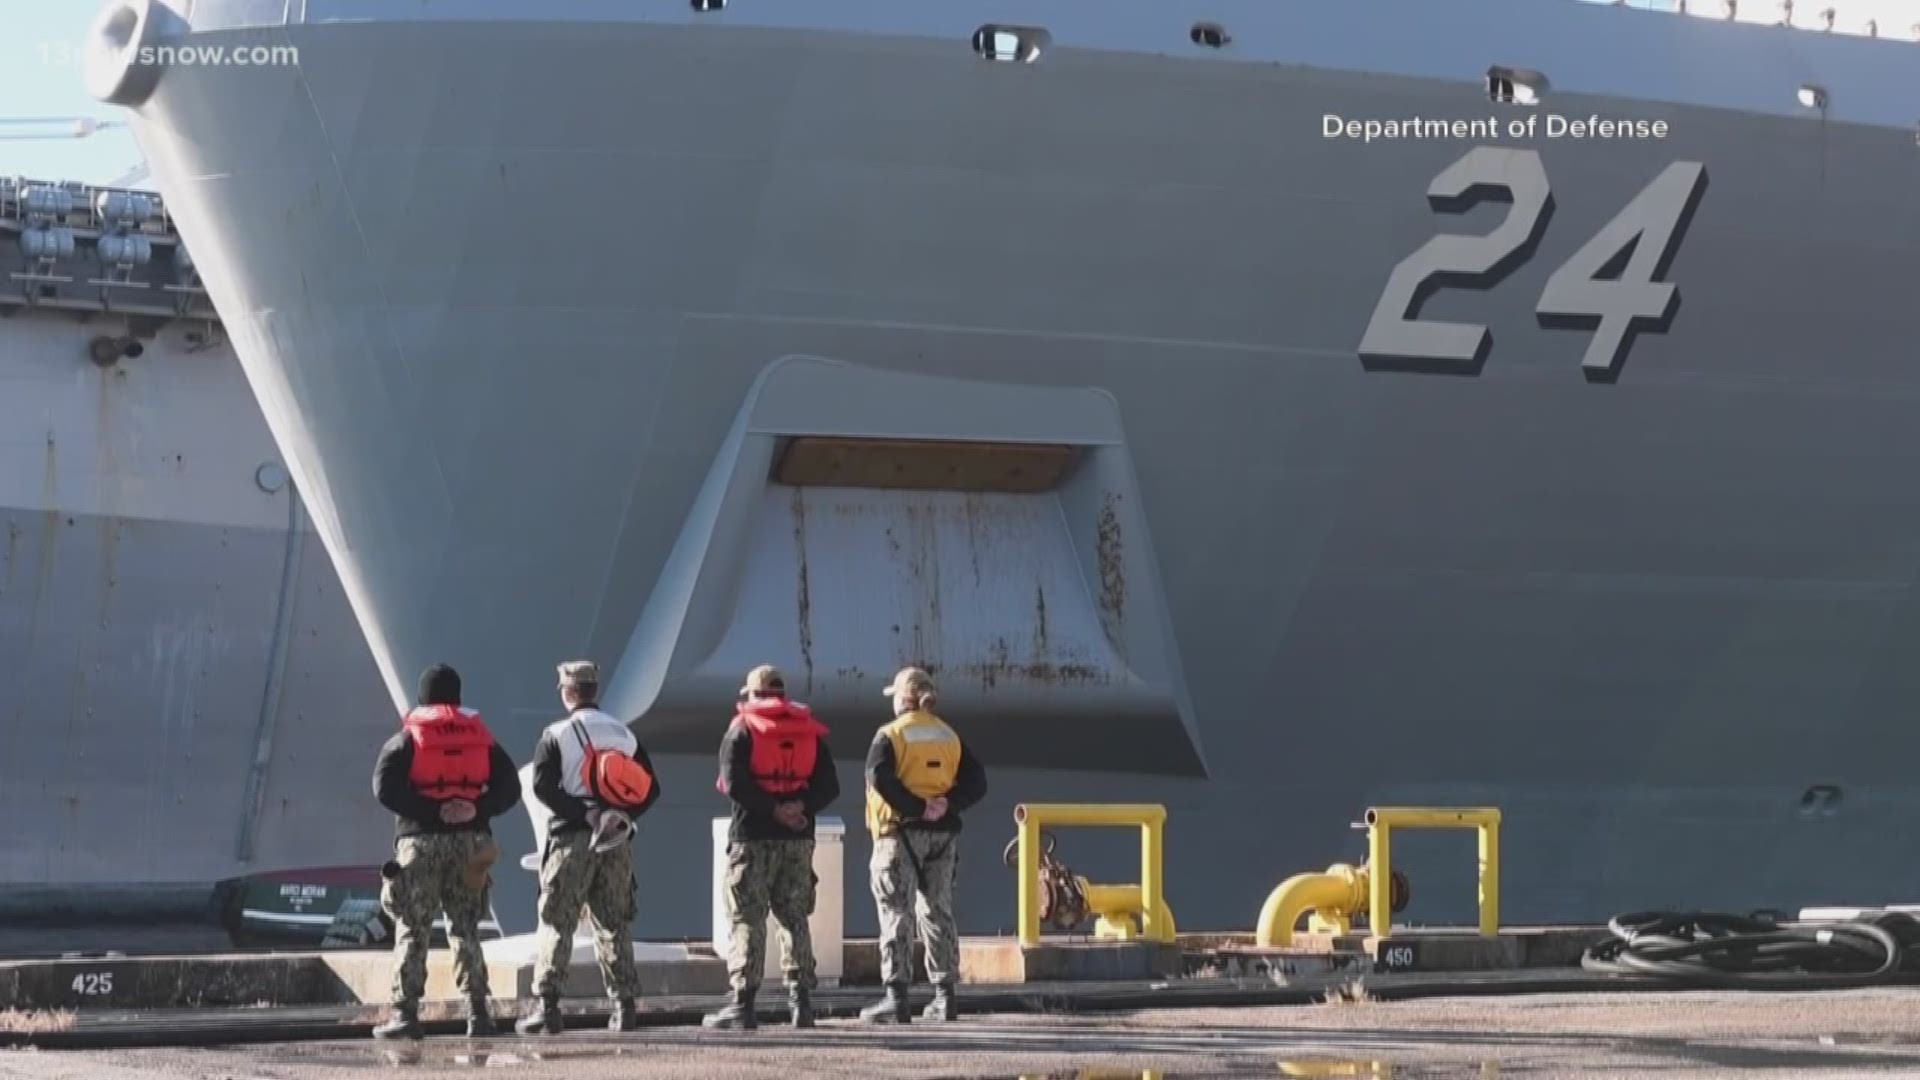 A sailor died aboard the Norfolk-based USS Arlington, according to the U.S. Navy.